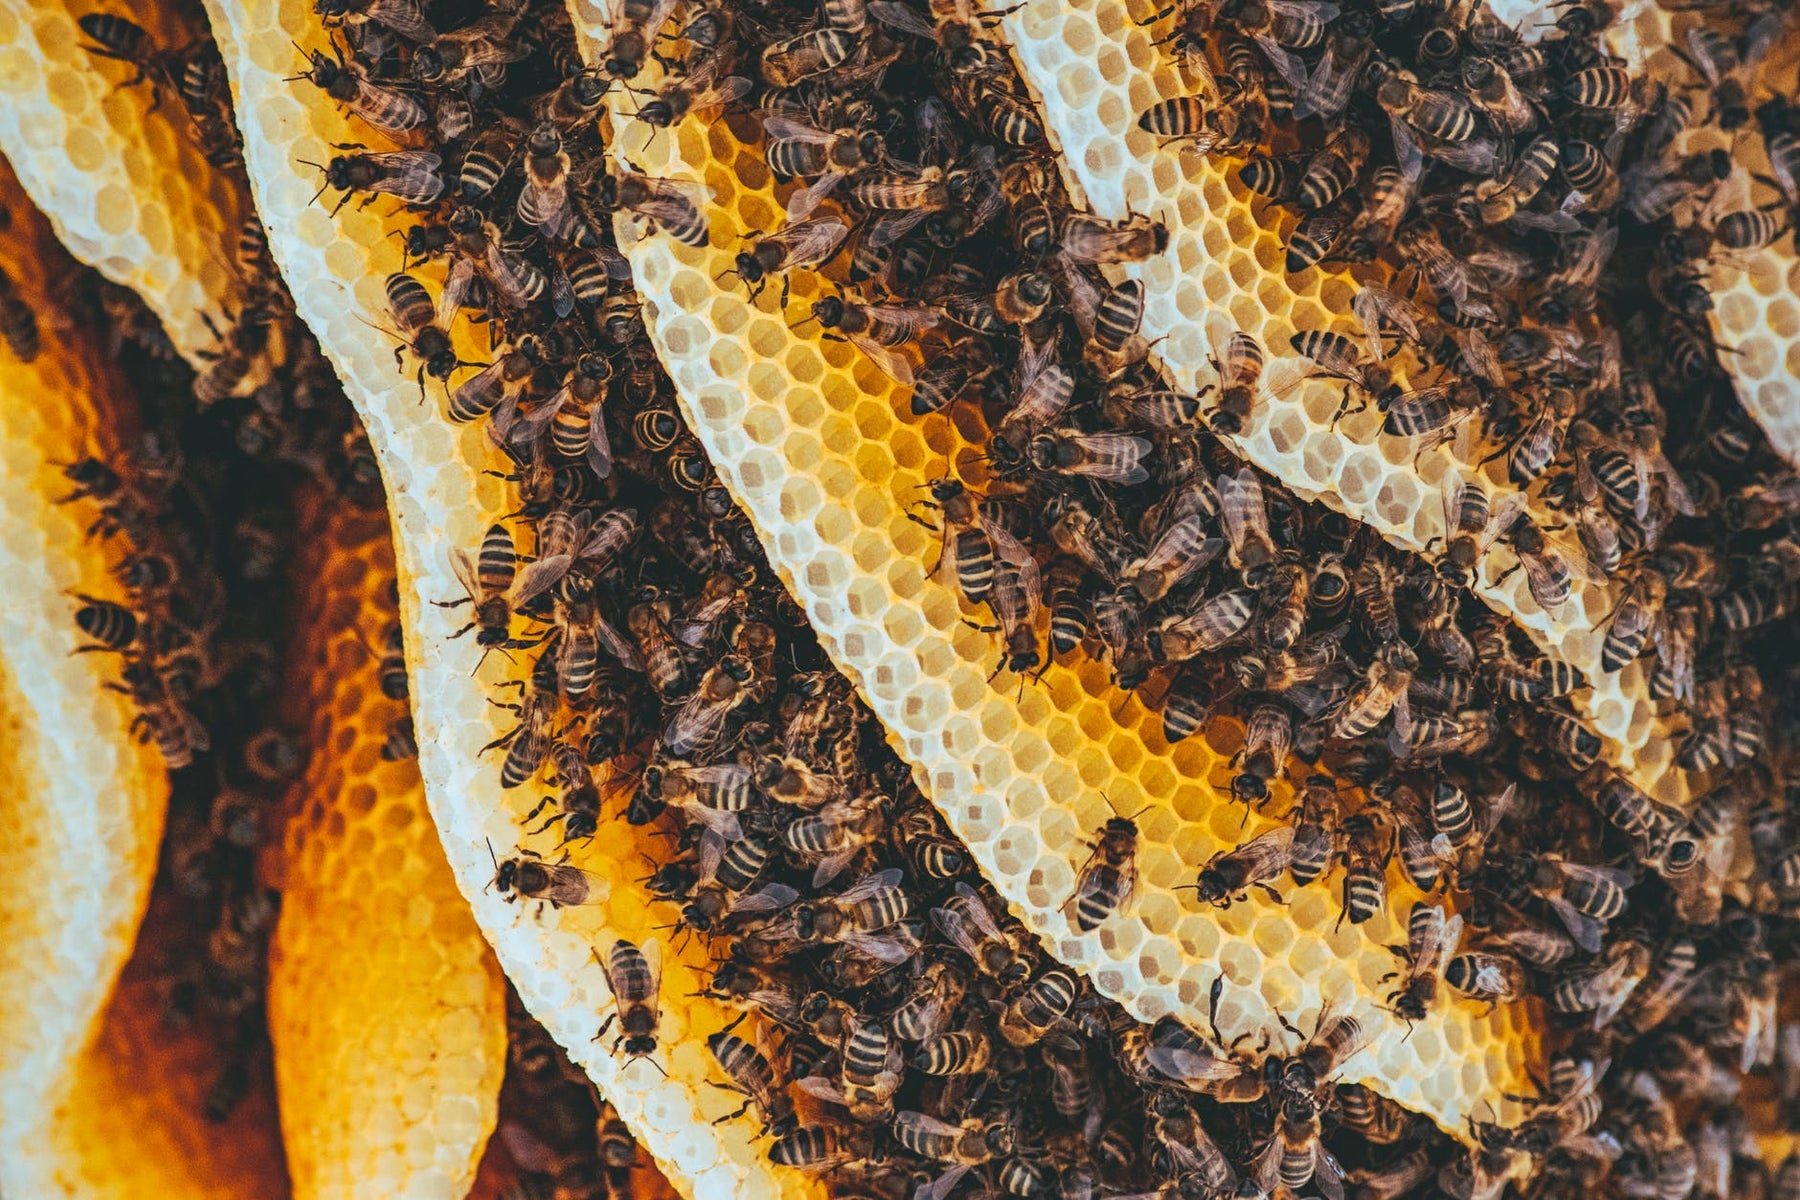 Hobby During Pandemic | Why Beekeeping Is the Ideal Hobby During the Coronavirus Pandemic